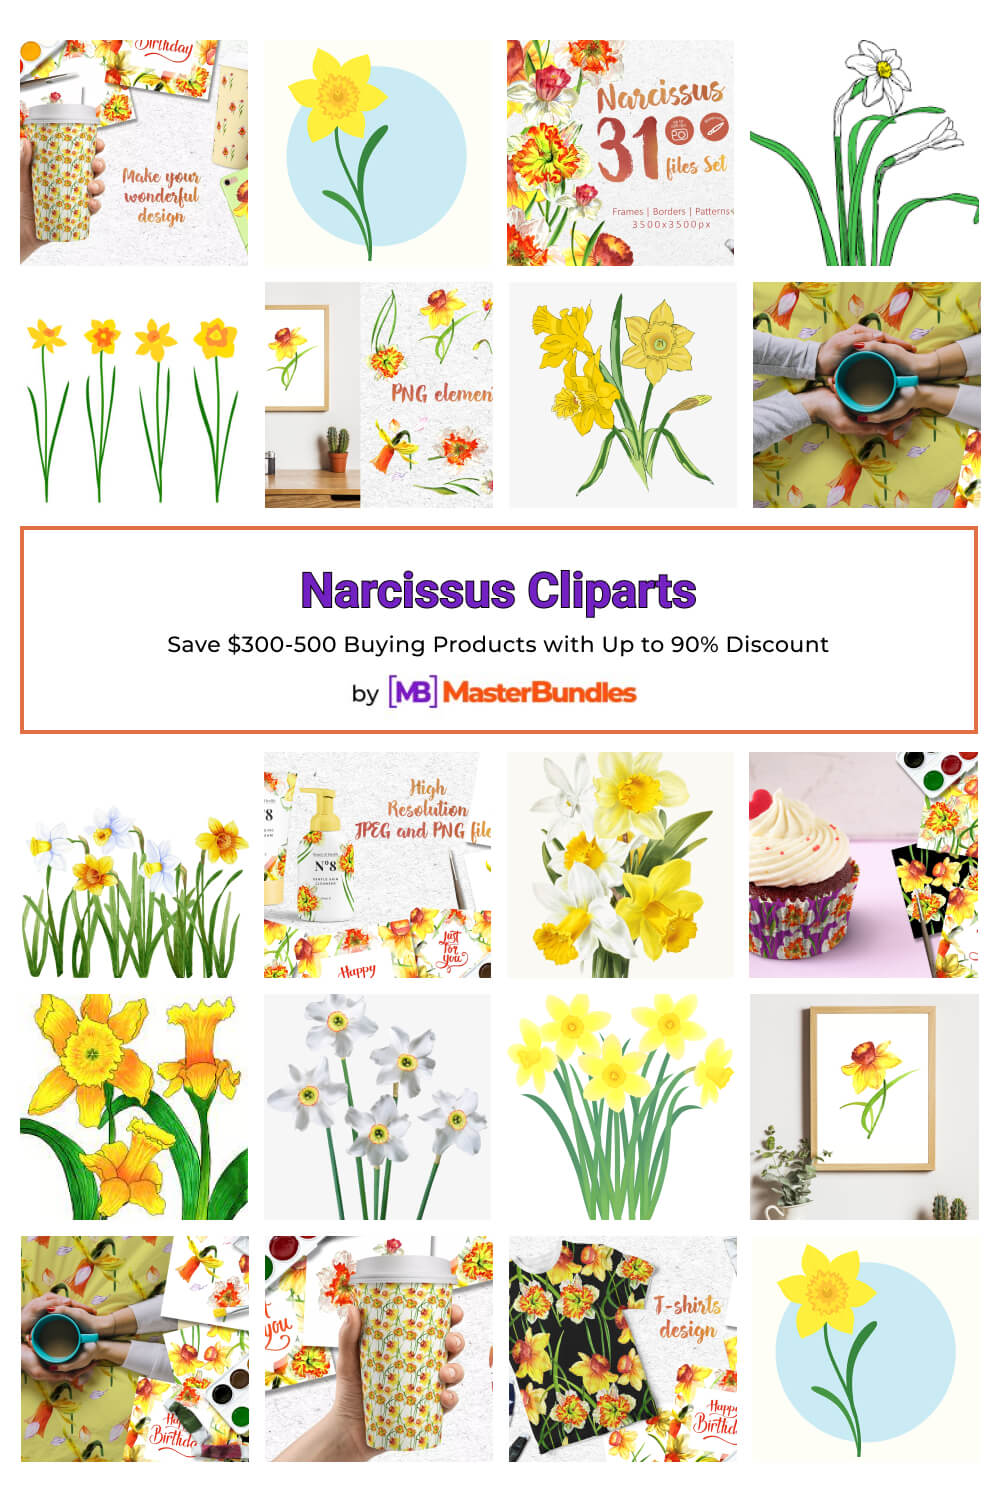 narcissus cliparts pinterest image.